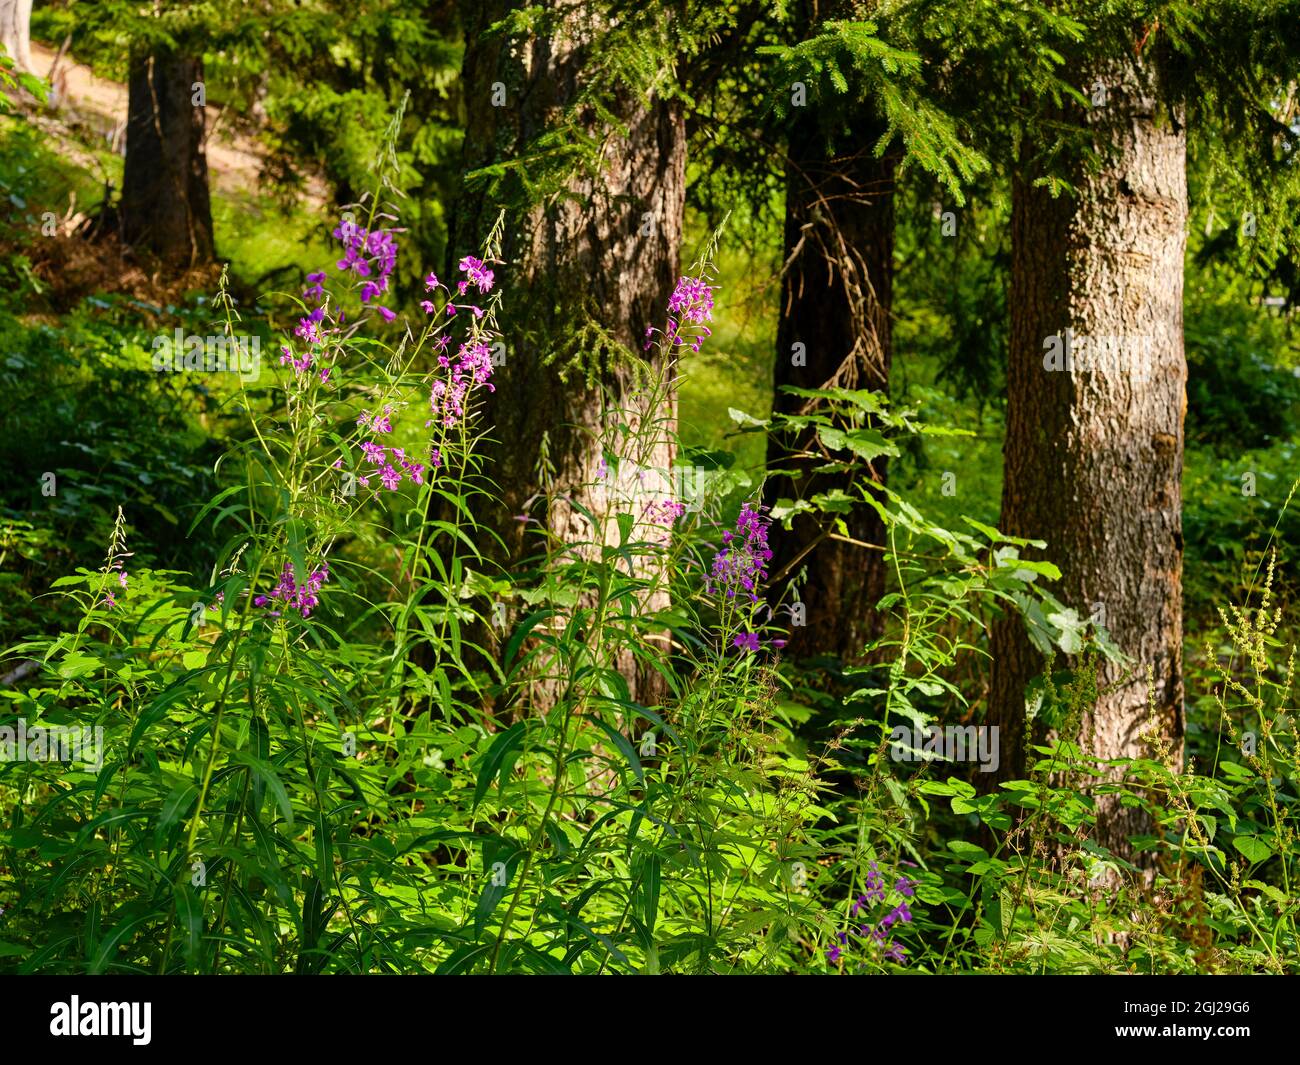 Spontaneous flower Epilobium or carnation greater in a forest in the mountains, also known as St. Anthony's wort. Stock Photo